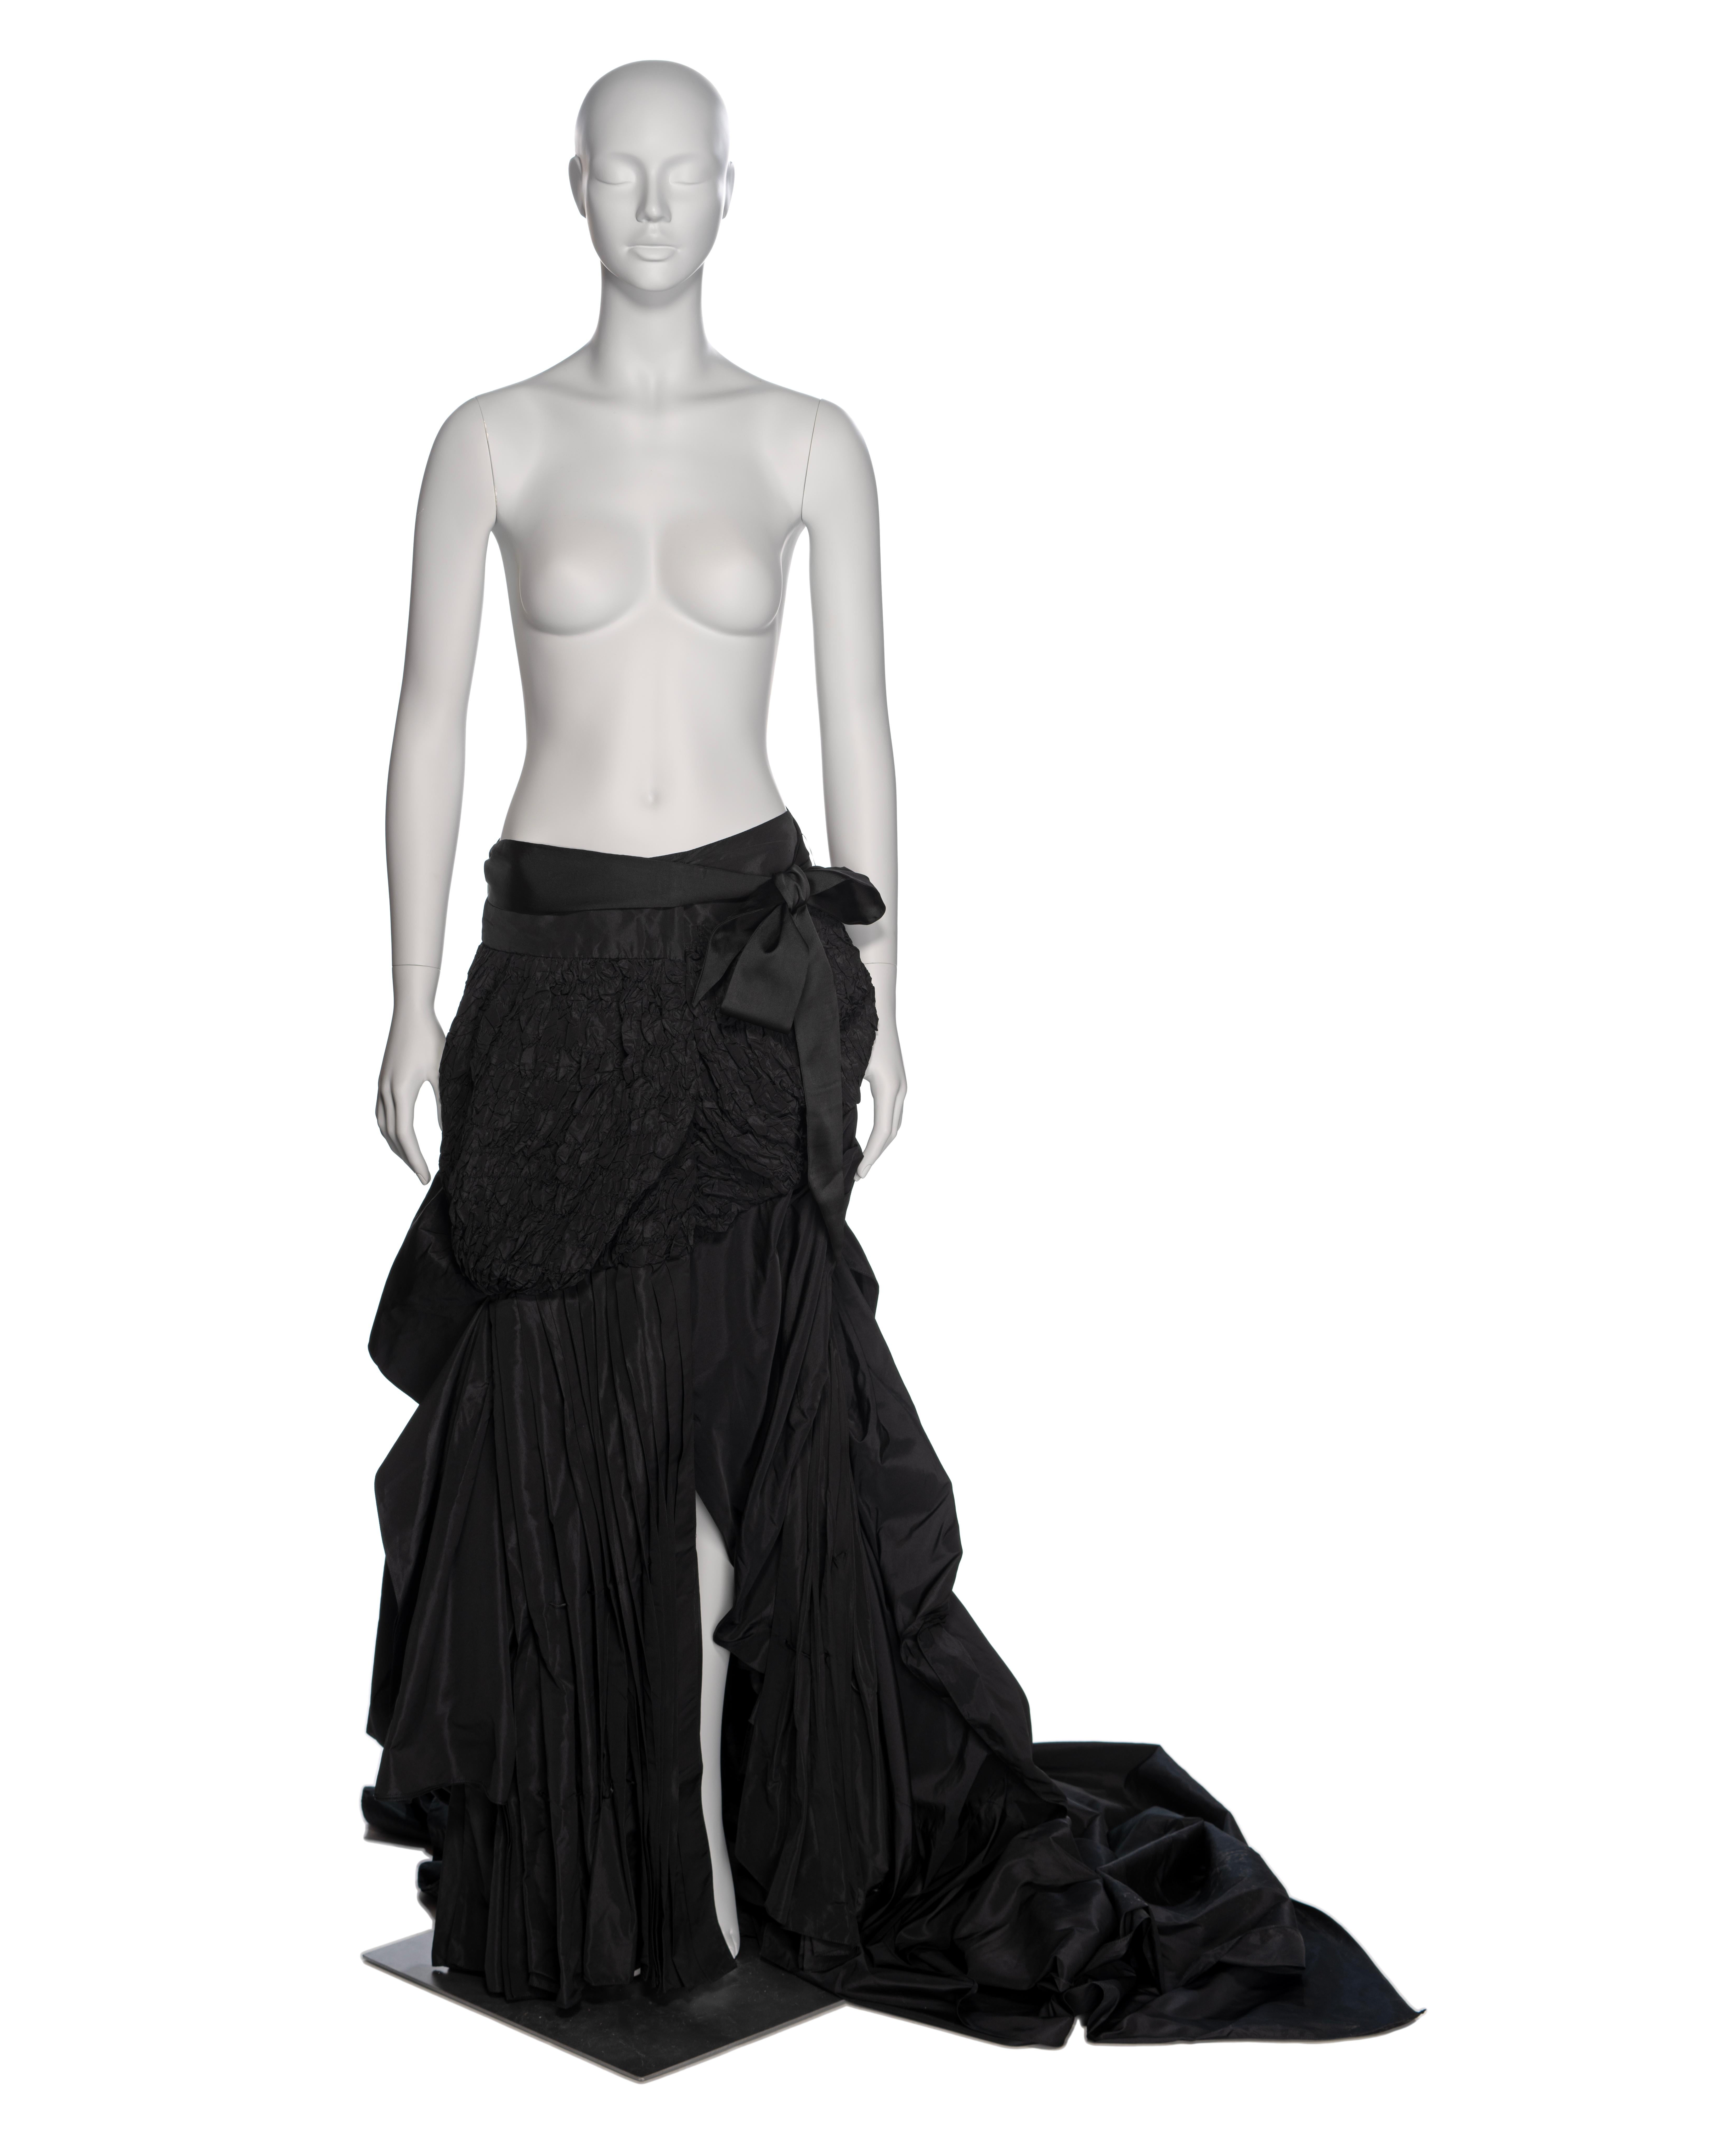 ▪ Brand: Yves Saint Laurent
▪ Creative Director: Tom Ford
▪ Collection: Fall-Winter 2001
▪ Sold by: One of a Kind Archive
▪ Fabric: Silk Taffeta 
▪ Details: Smocking, accordion pleating, wrap fastening, silk ribbon belt, train
▪ Size: approx. FR38 -